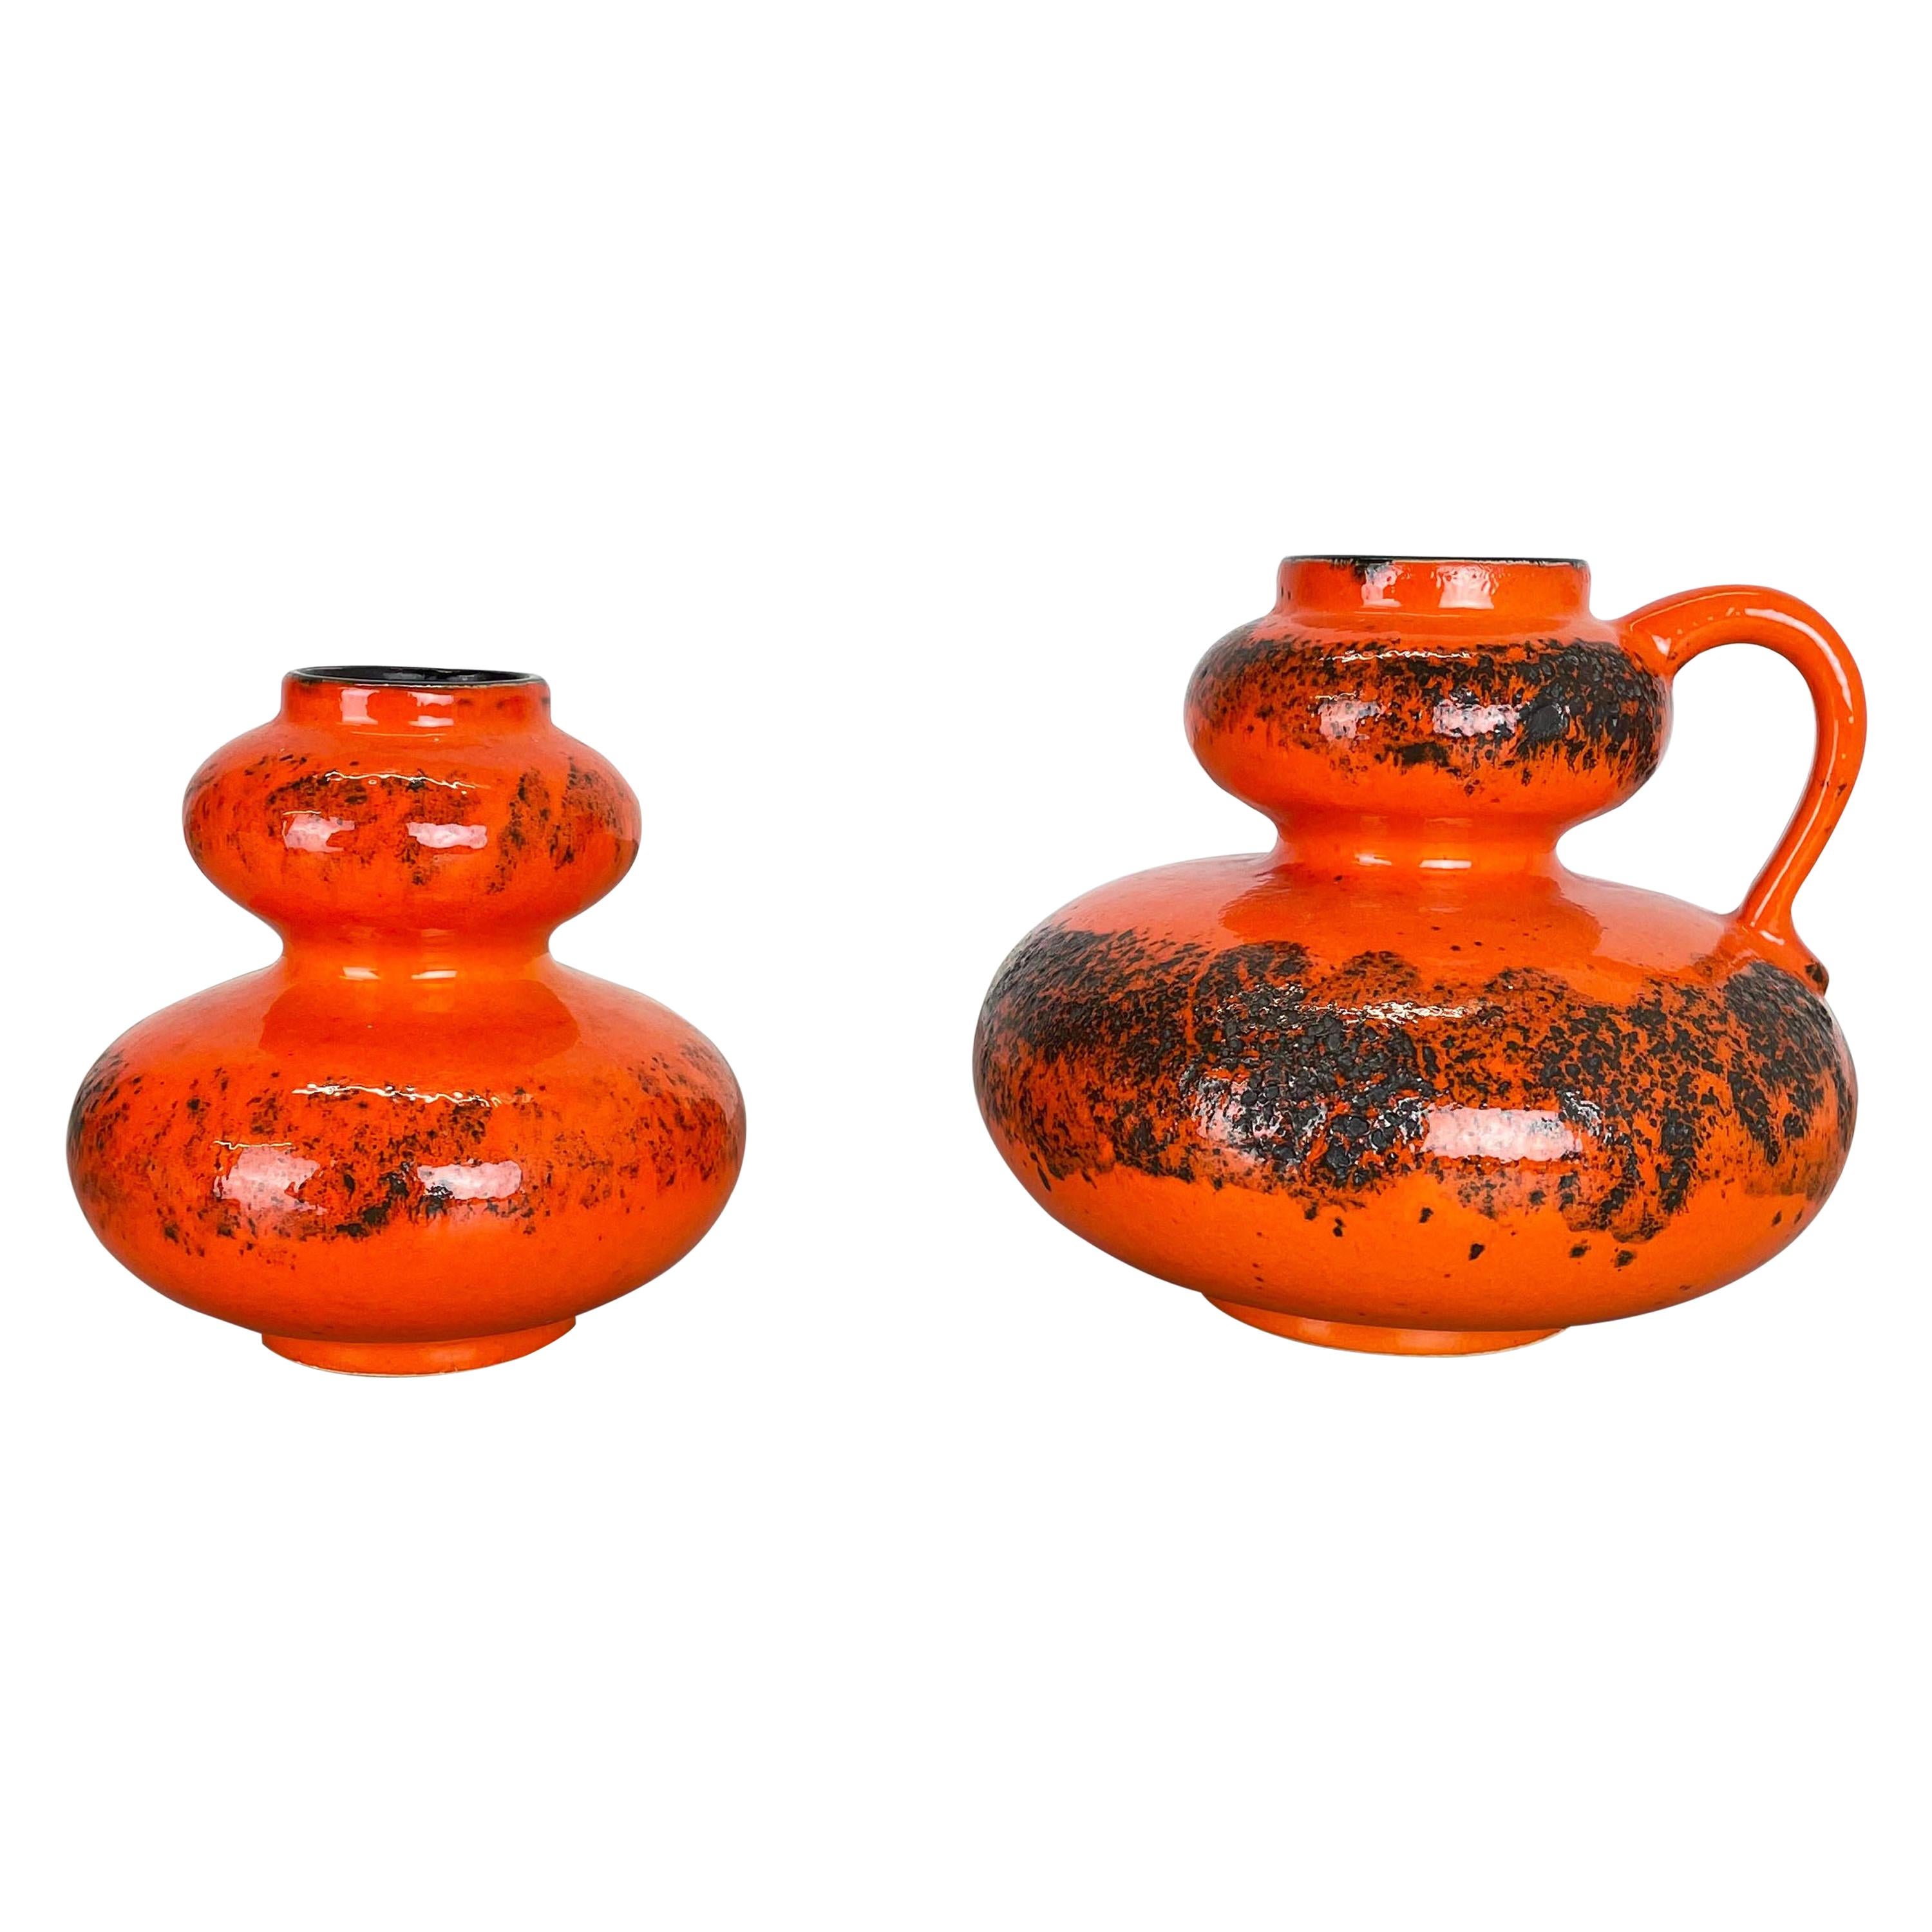 Set of Two Pottery Fat Lava Vases "Orange" Made by Spara Ceramic, Germany 1970s For Sale